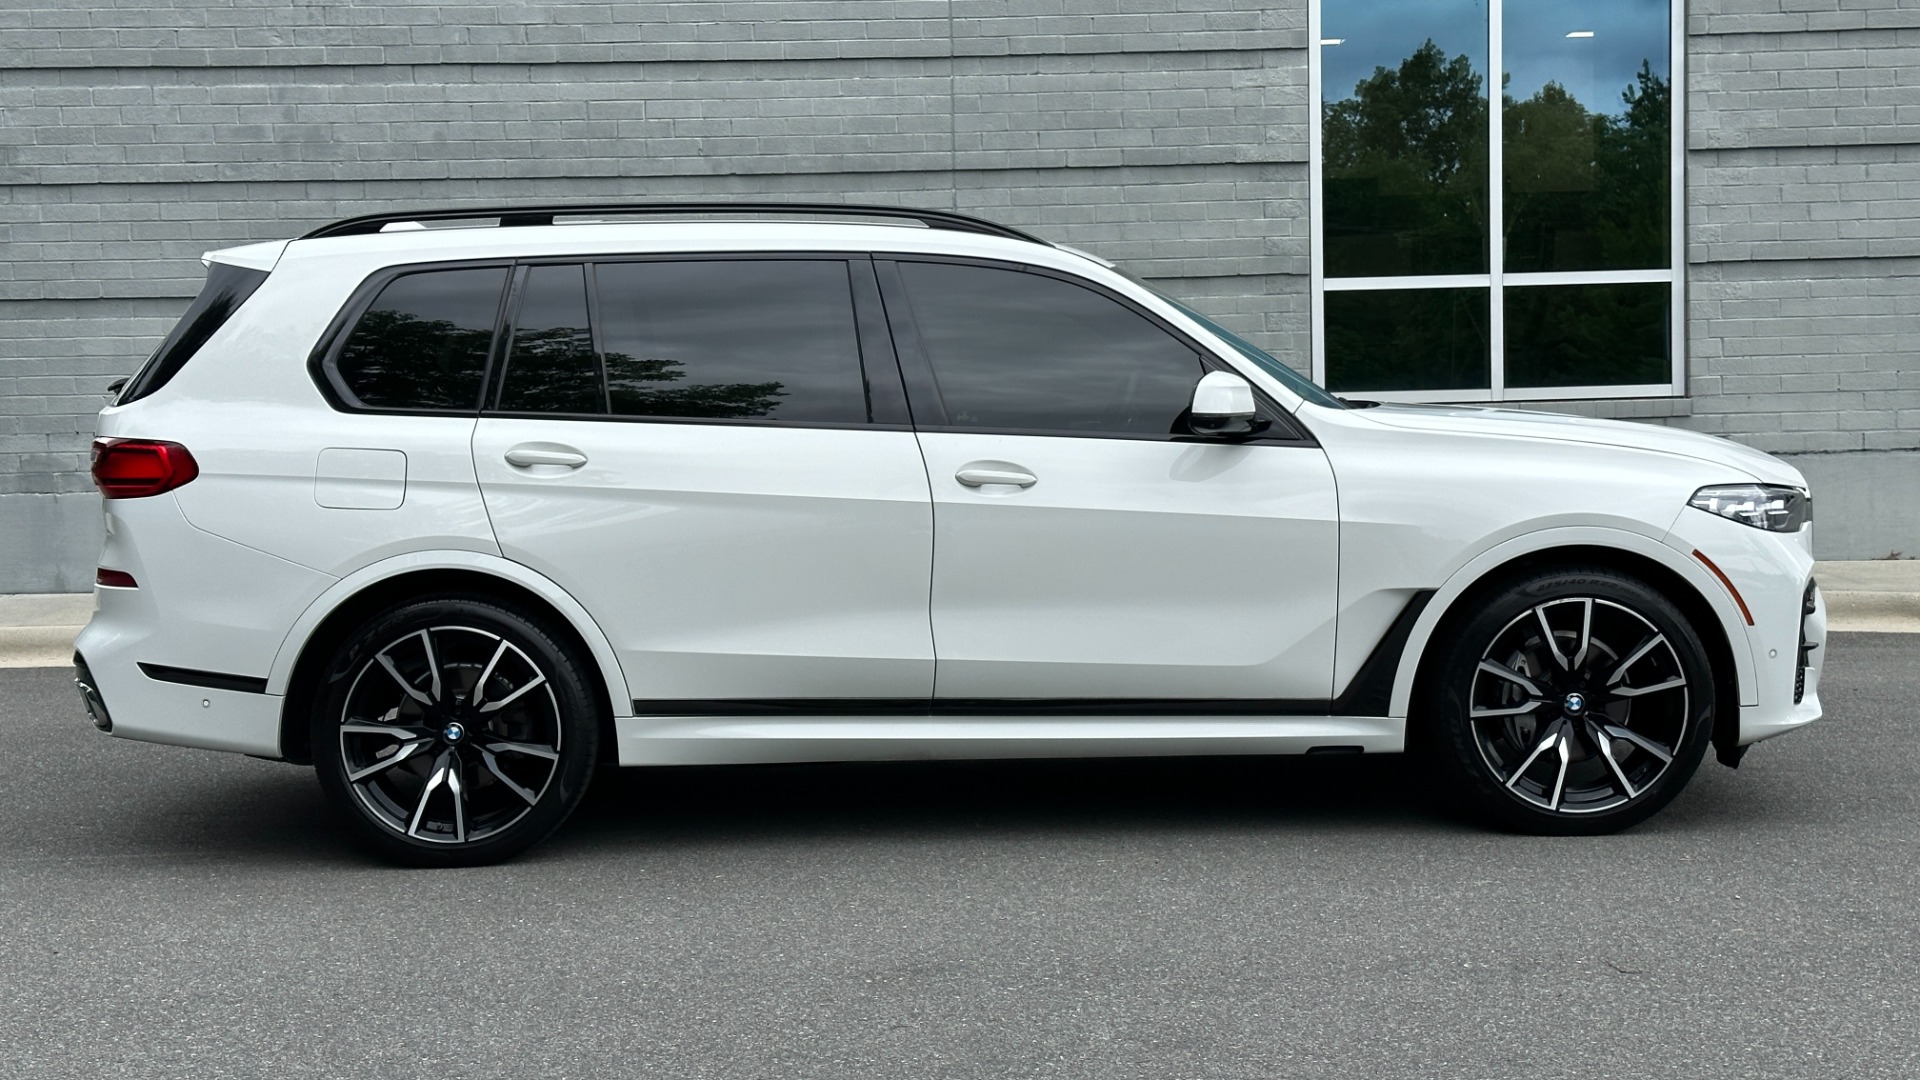 Used 2020 BMW X7 xDrive40i / 22IN WHEELS / CAPTAIN CHAIRS / M SPORT / PREMIUM PKG for sale $59,995 at Formula Imports in Charlotte NC 28227 3